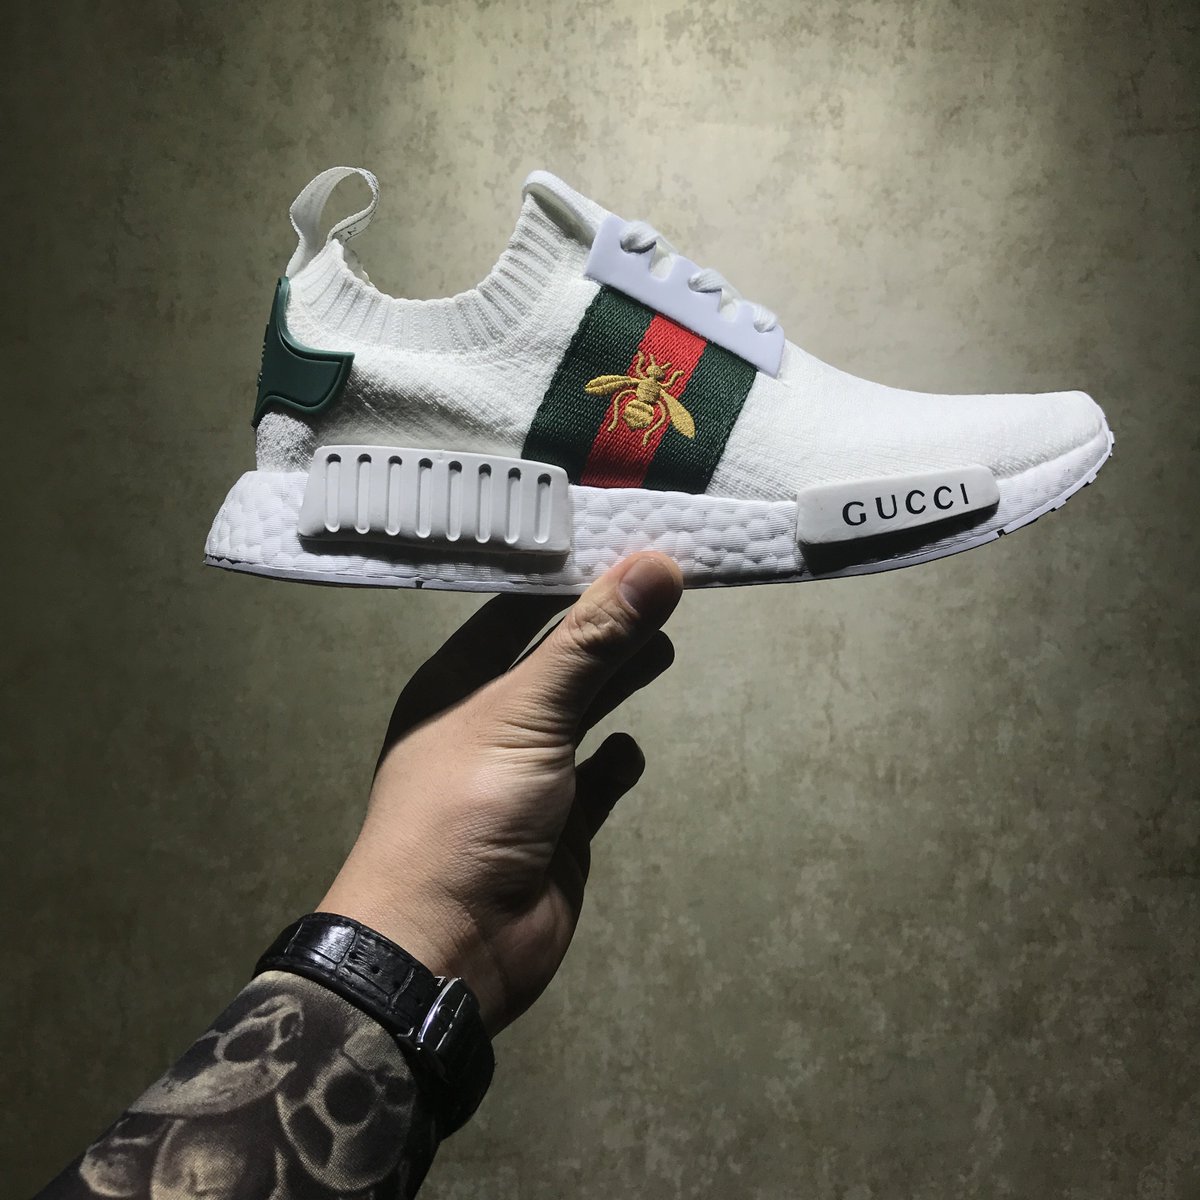 Experience Adidas NMD R1 X Gucci Anthony s Fashion Style